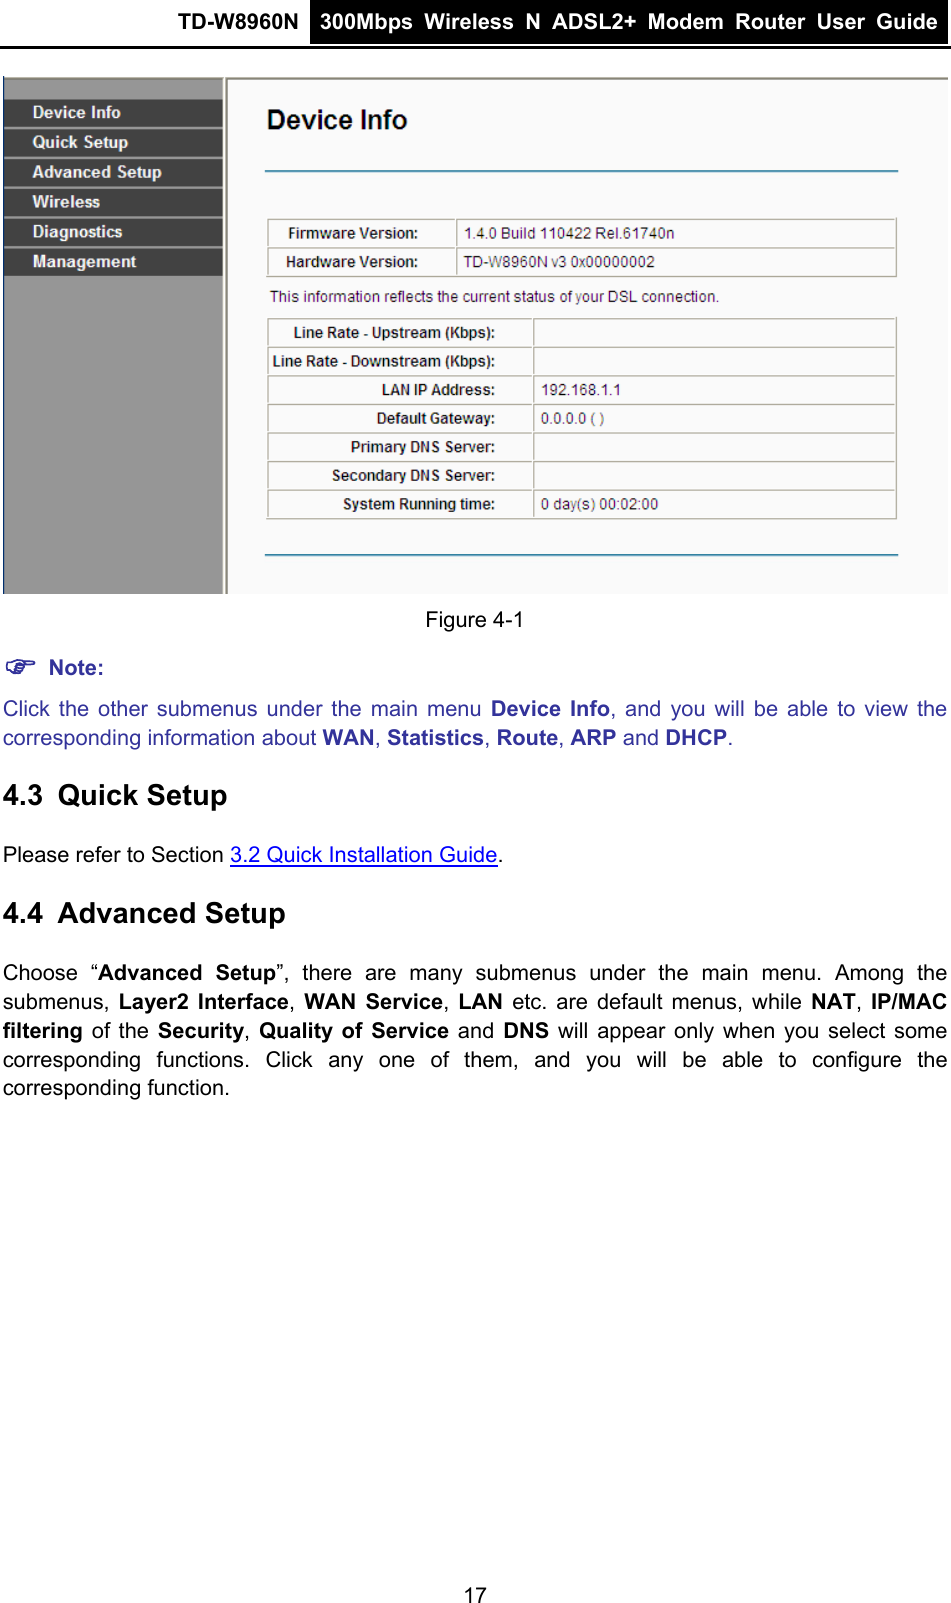 TD-W8960N  300Mbps Wireless N ADSL2+ Modem Router User Guide   Figure 4-1 ) Note: Click the other submenus under the main menu Device Info, and you will be able to view the corresponding information about WAN, Statistics, Route, ARP and DHCP. 4.3  Quick Setup Please refer to Section 3.2 Quick Installation Guide. 4.4  Advanced Setup Choose “Advanced Setup”, there are many submenus under the main menu. Among the submenus, Layer2 Interface,  WAN Service, LAN  etc. are default menus, while NAT, IP/MAC filtering  of the Security, Quality of Service and DNS will appear only when you select some corresponding functions. Click any one of them, and you will be able to configure the corresponding function. 17 